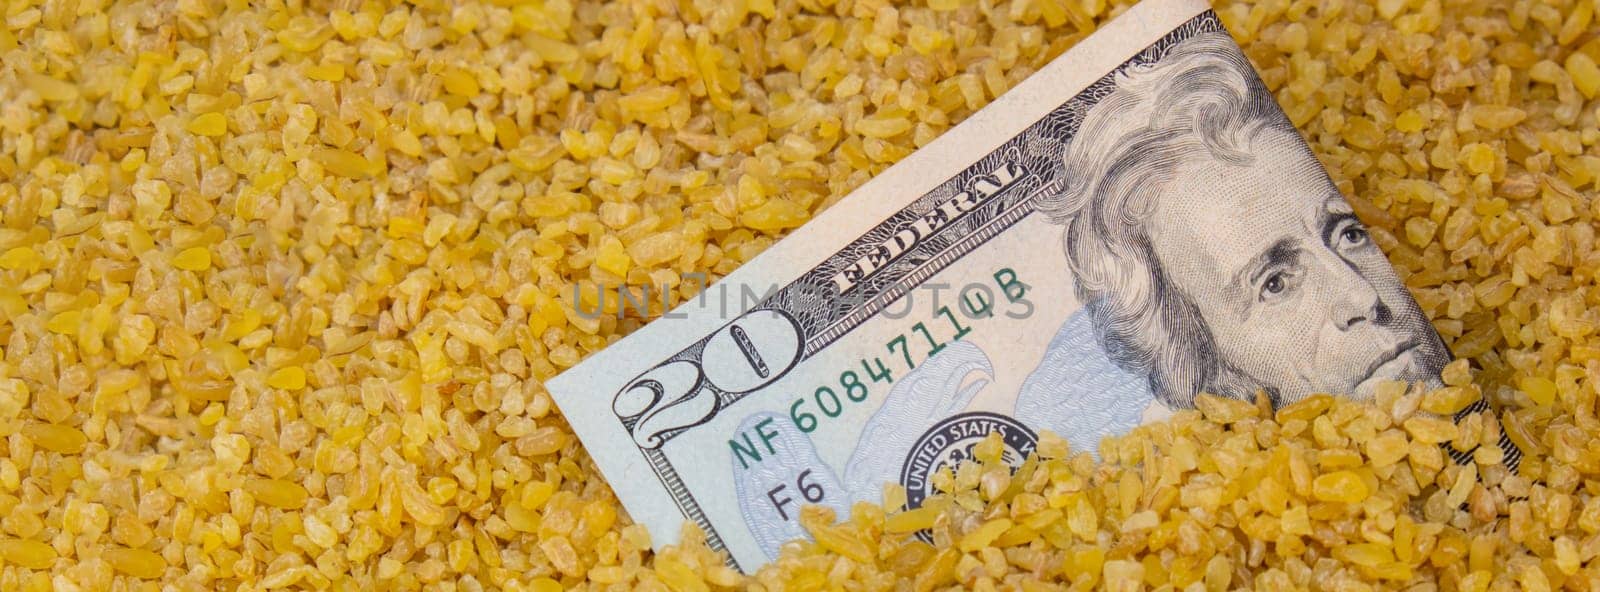 US Dollar bill paper money currency banknote in buckwheat porridge. The crisis in the market of grain crops, the rise in prices or production volumes of buckwheat Food and groceries shopping price increase, Rising food cost food crisis inflation concept.